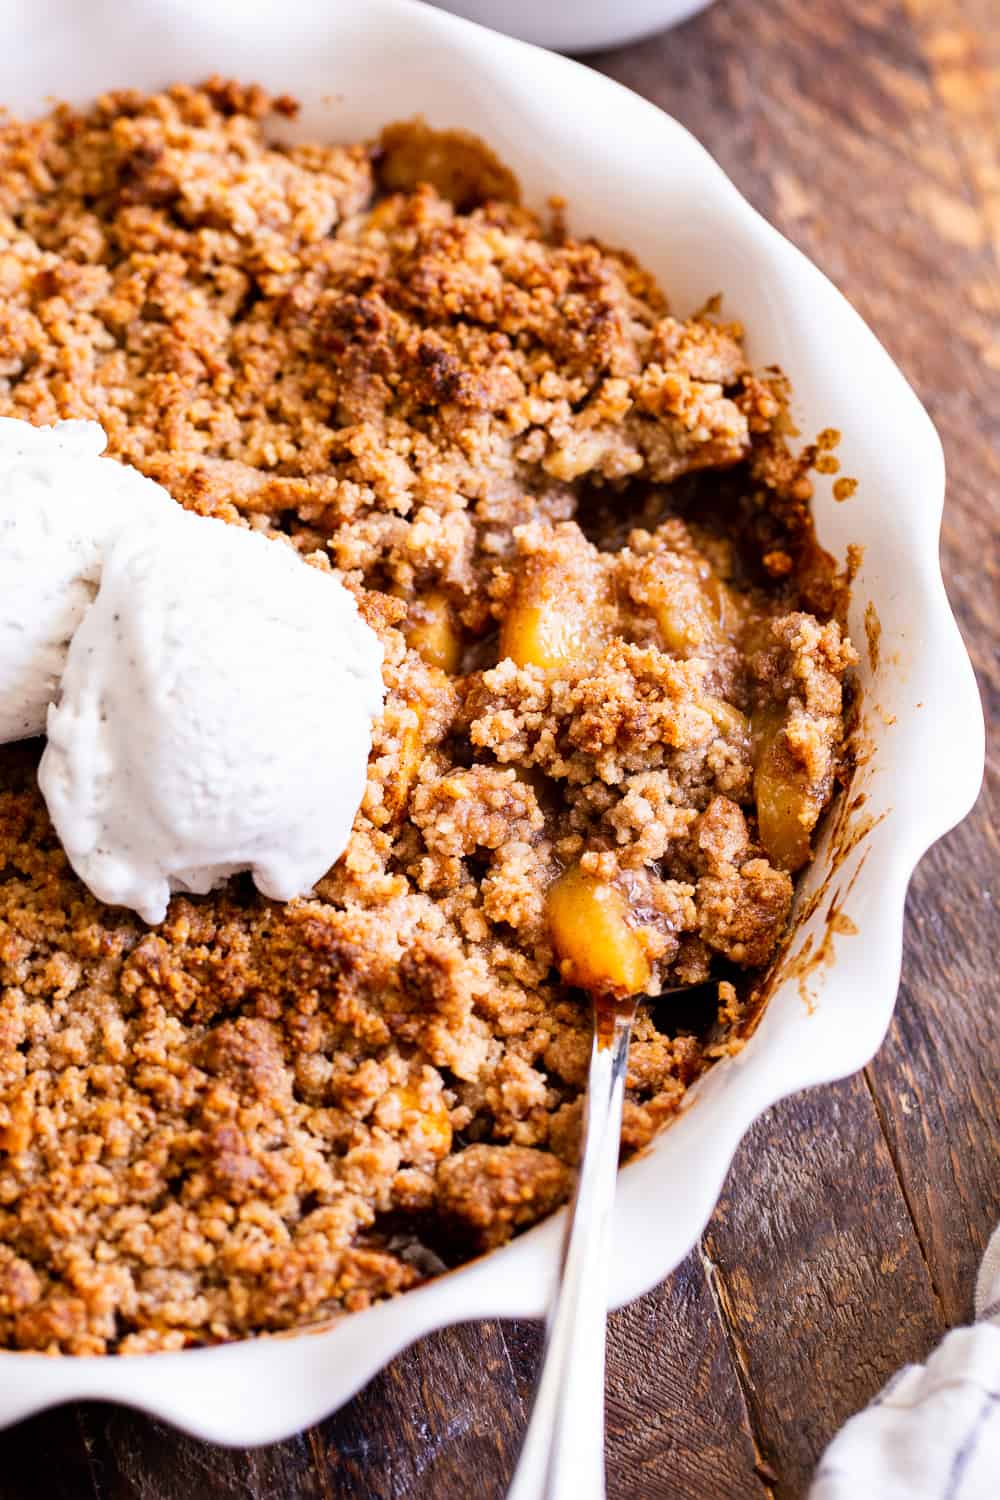 This paleo peach crisp has a juicy sweet peach filling with a toasty crisp topping that’s out of this world delicious! It’s truly the best peach crisp you’ll ever make. A fast family favorite for peach season, this crisp is paleo, vegan and gluten free. #paleo #dessert #peaches #vegan #cleaneating #glutenfreebaking 